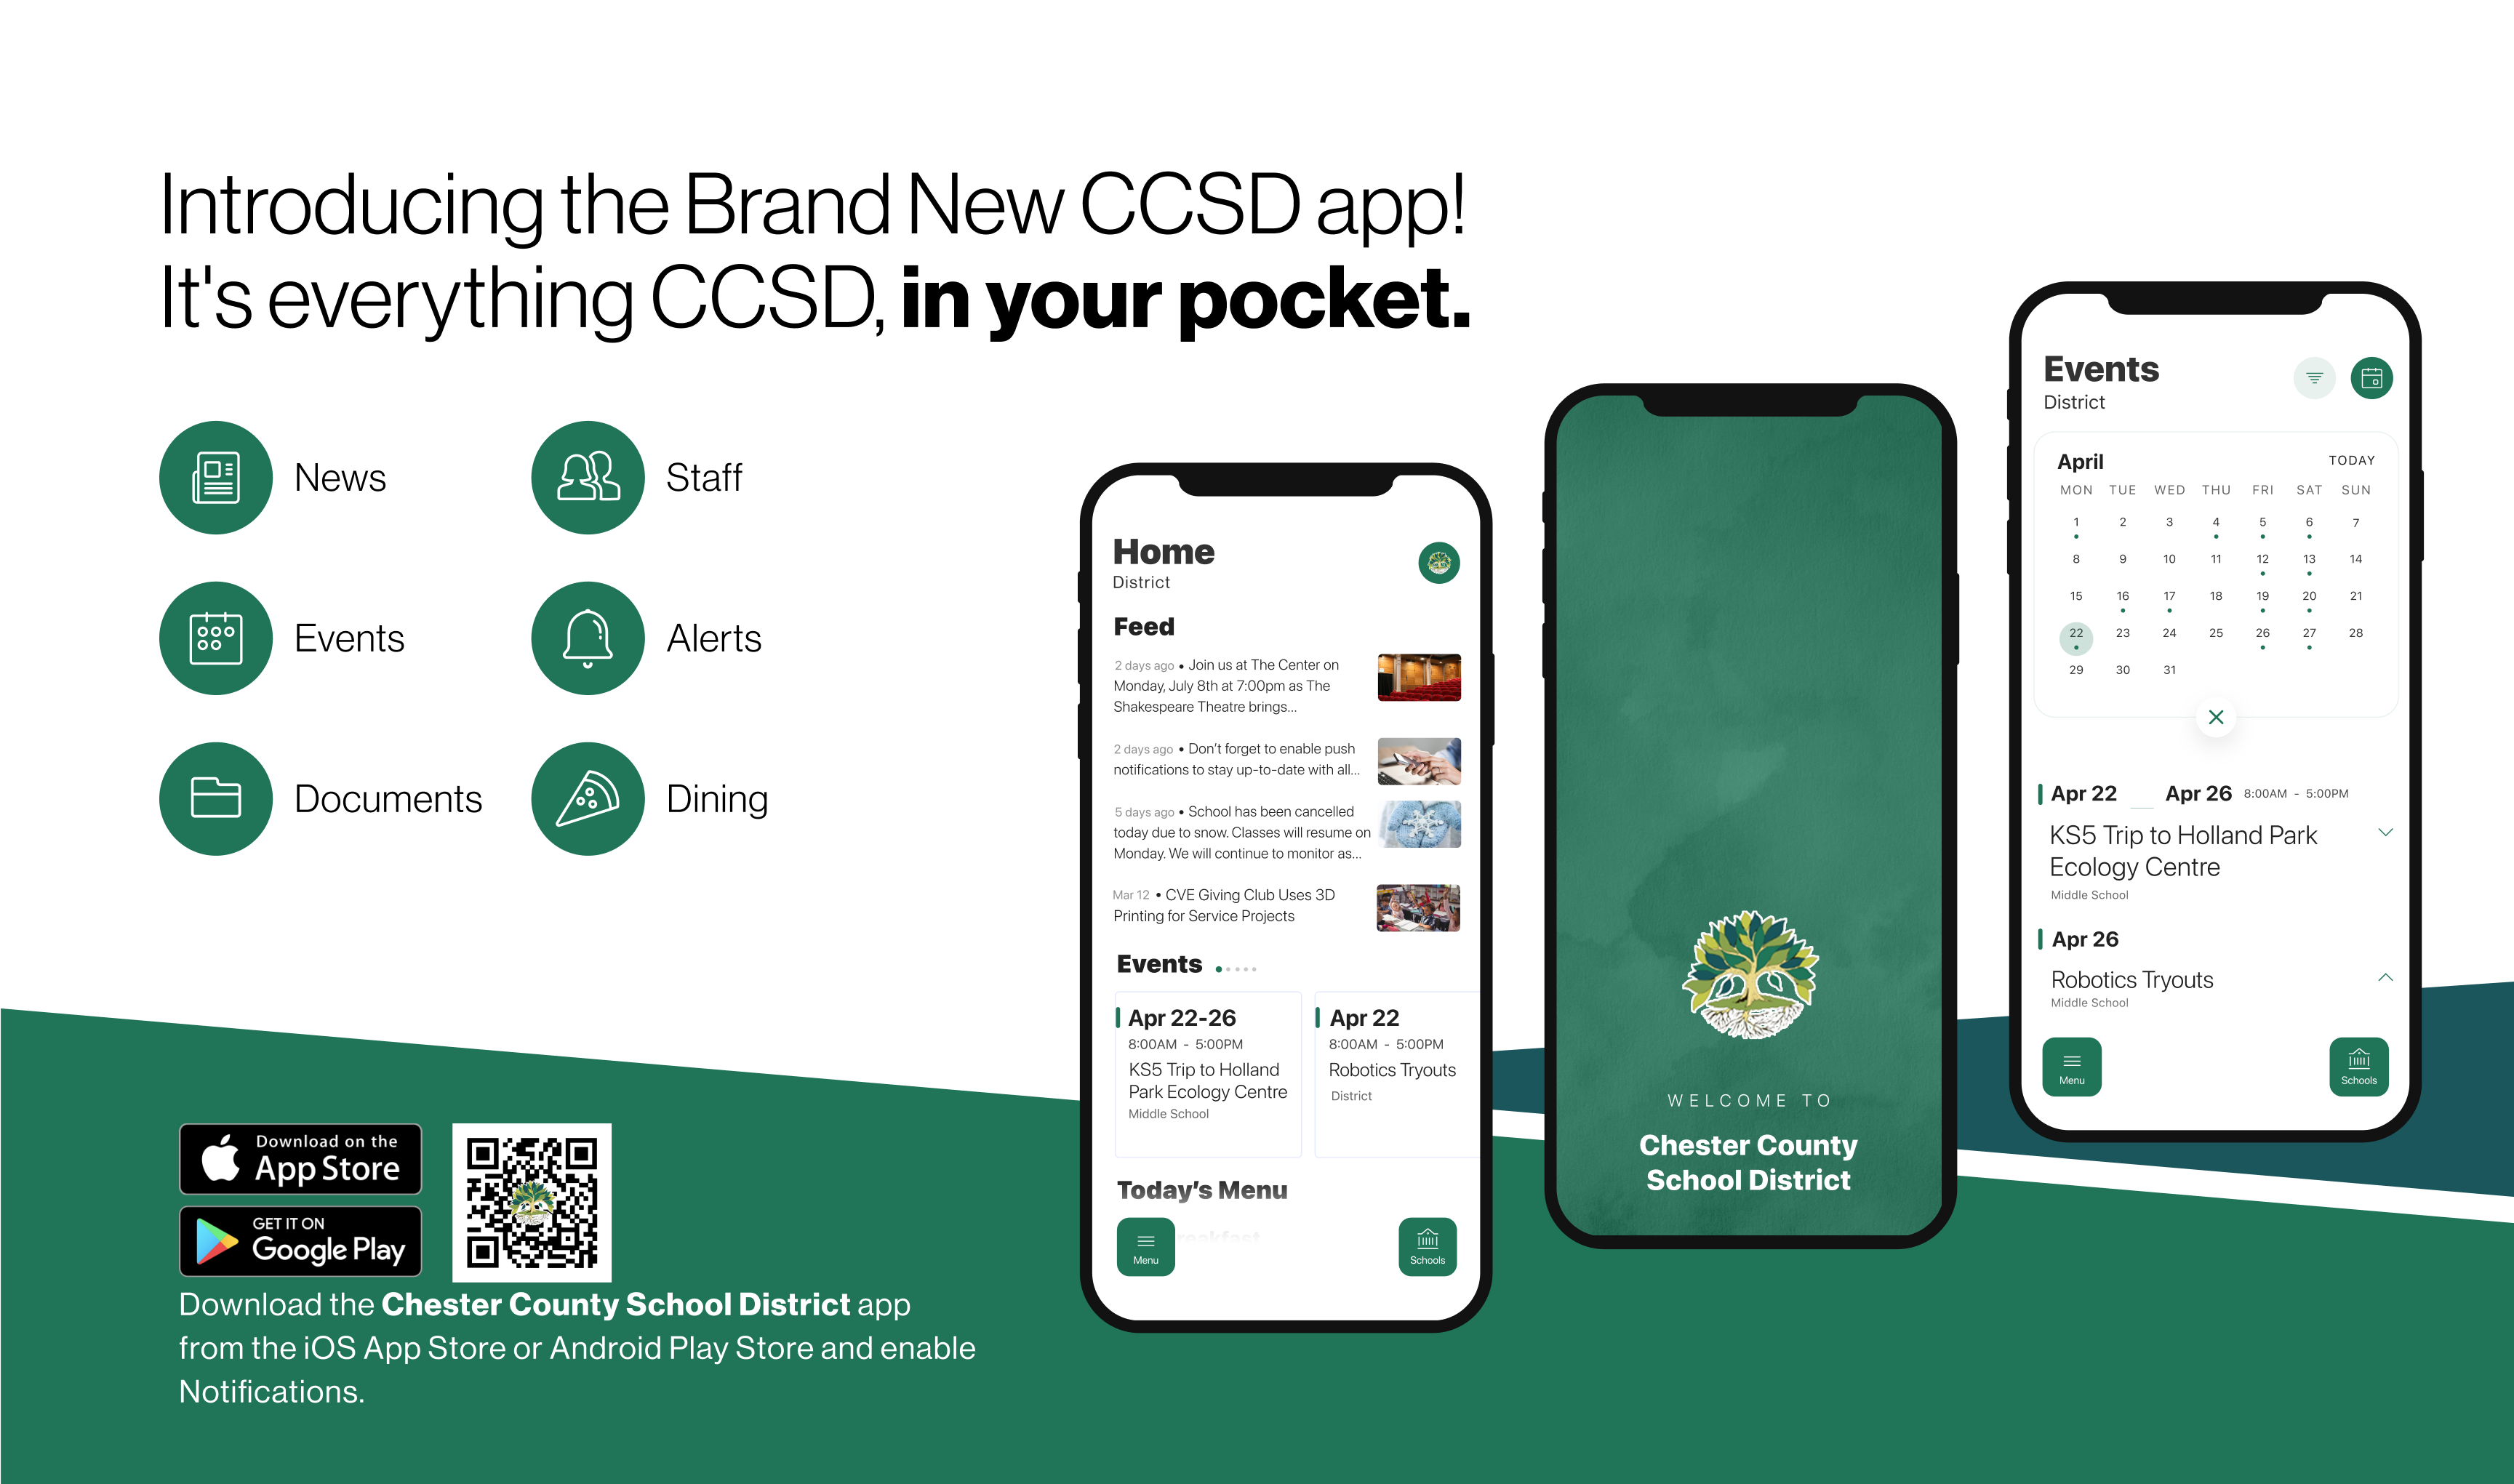 introducing the new CCSD mobile app!